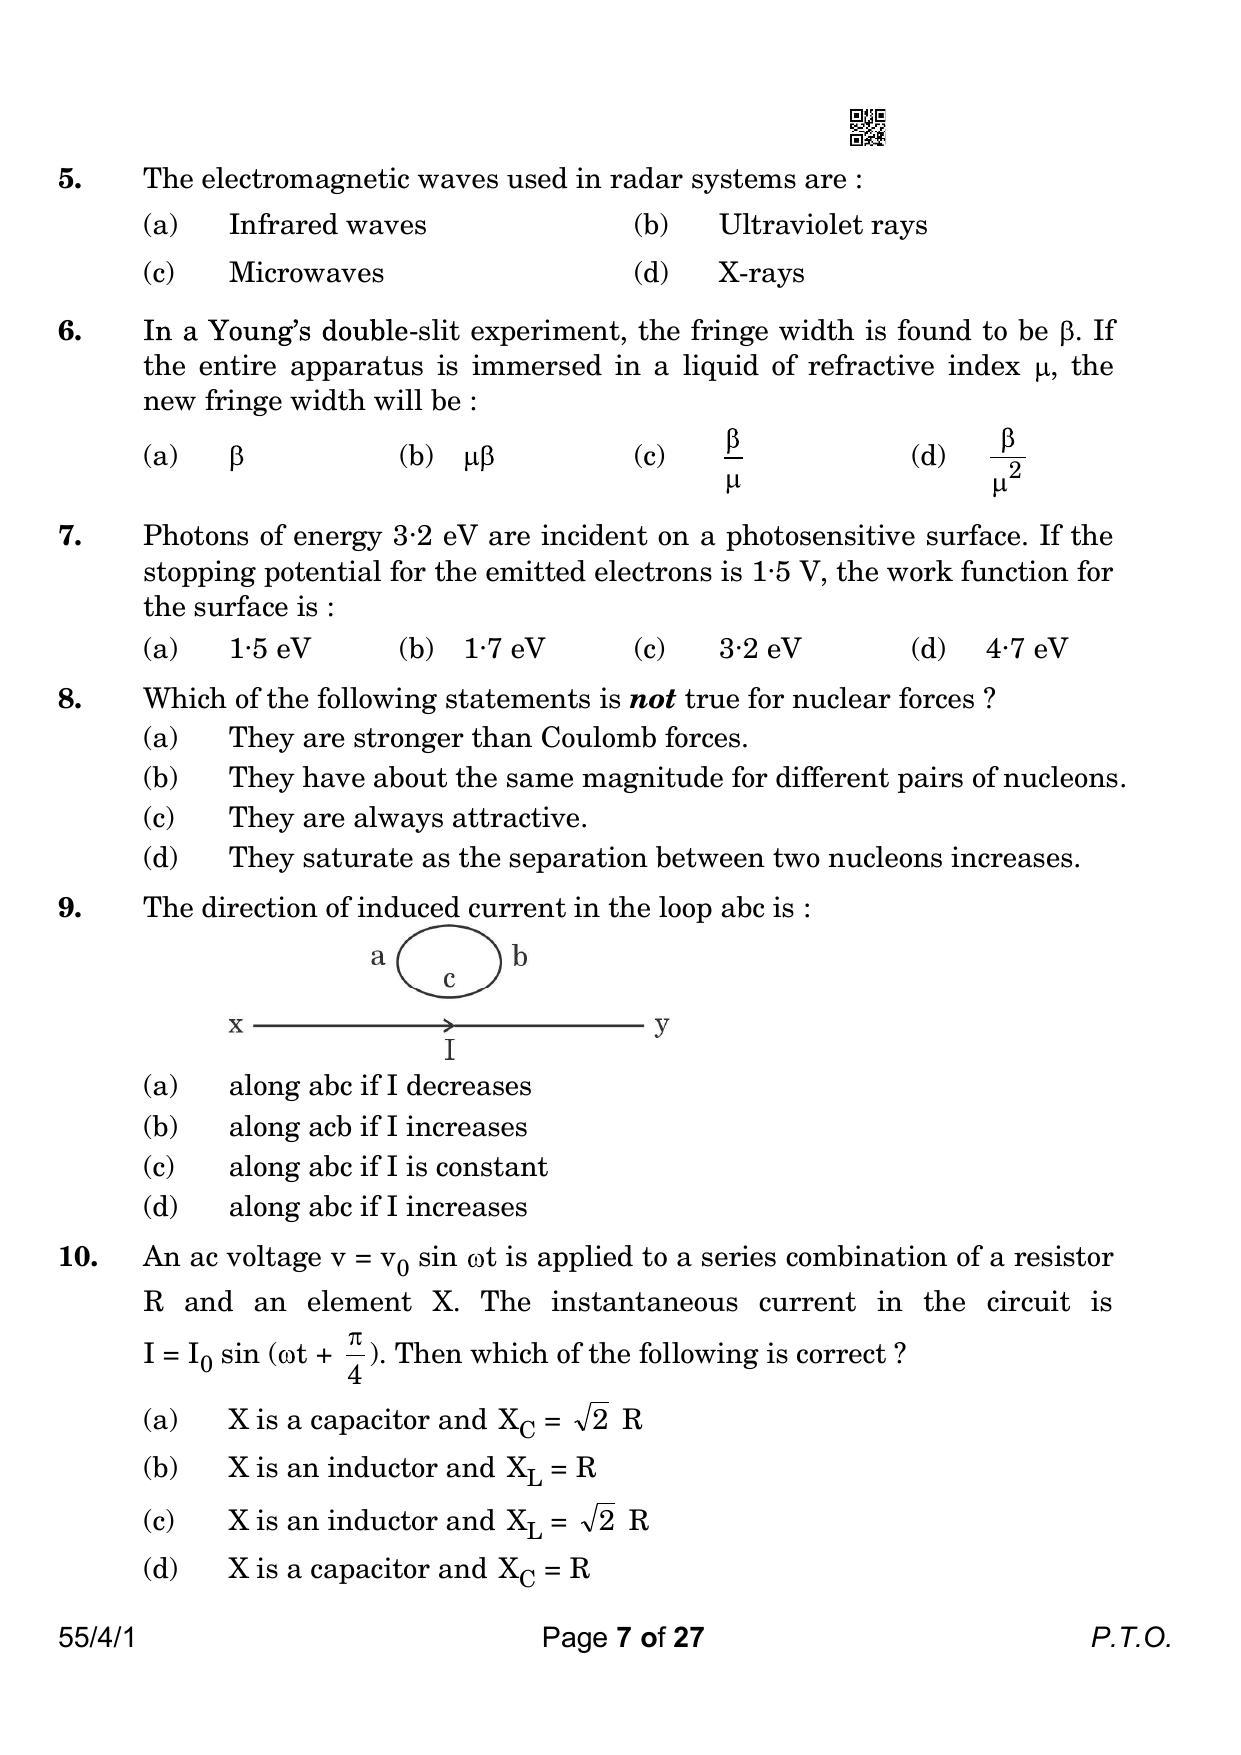 CBSE Class 12 55-4-1 Physics 2023 Question Paper - Page 7